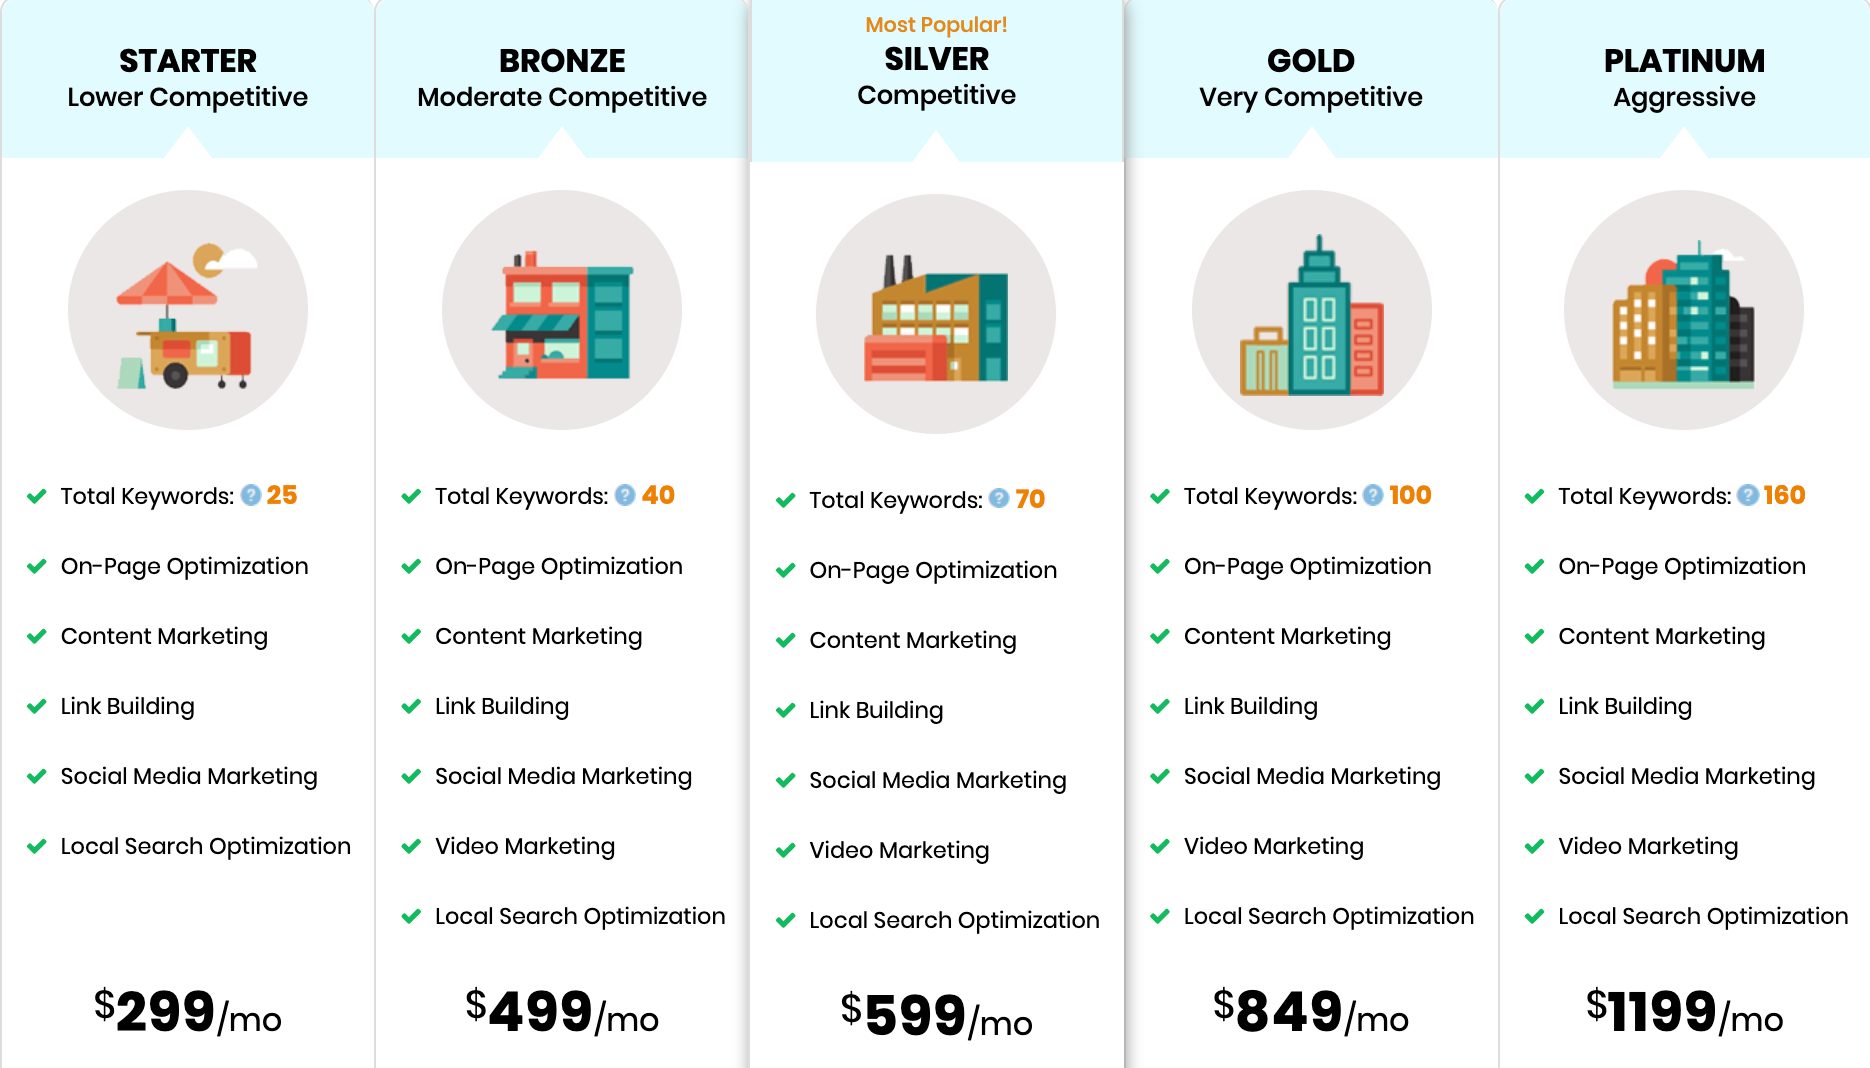 Comparison chart of seo service packages: starter, bronze, silver, gold, platinum, with features and pricing from $299 to $1199 per month.